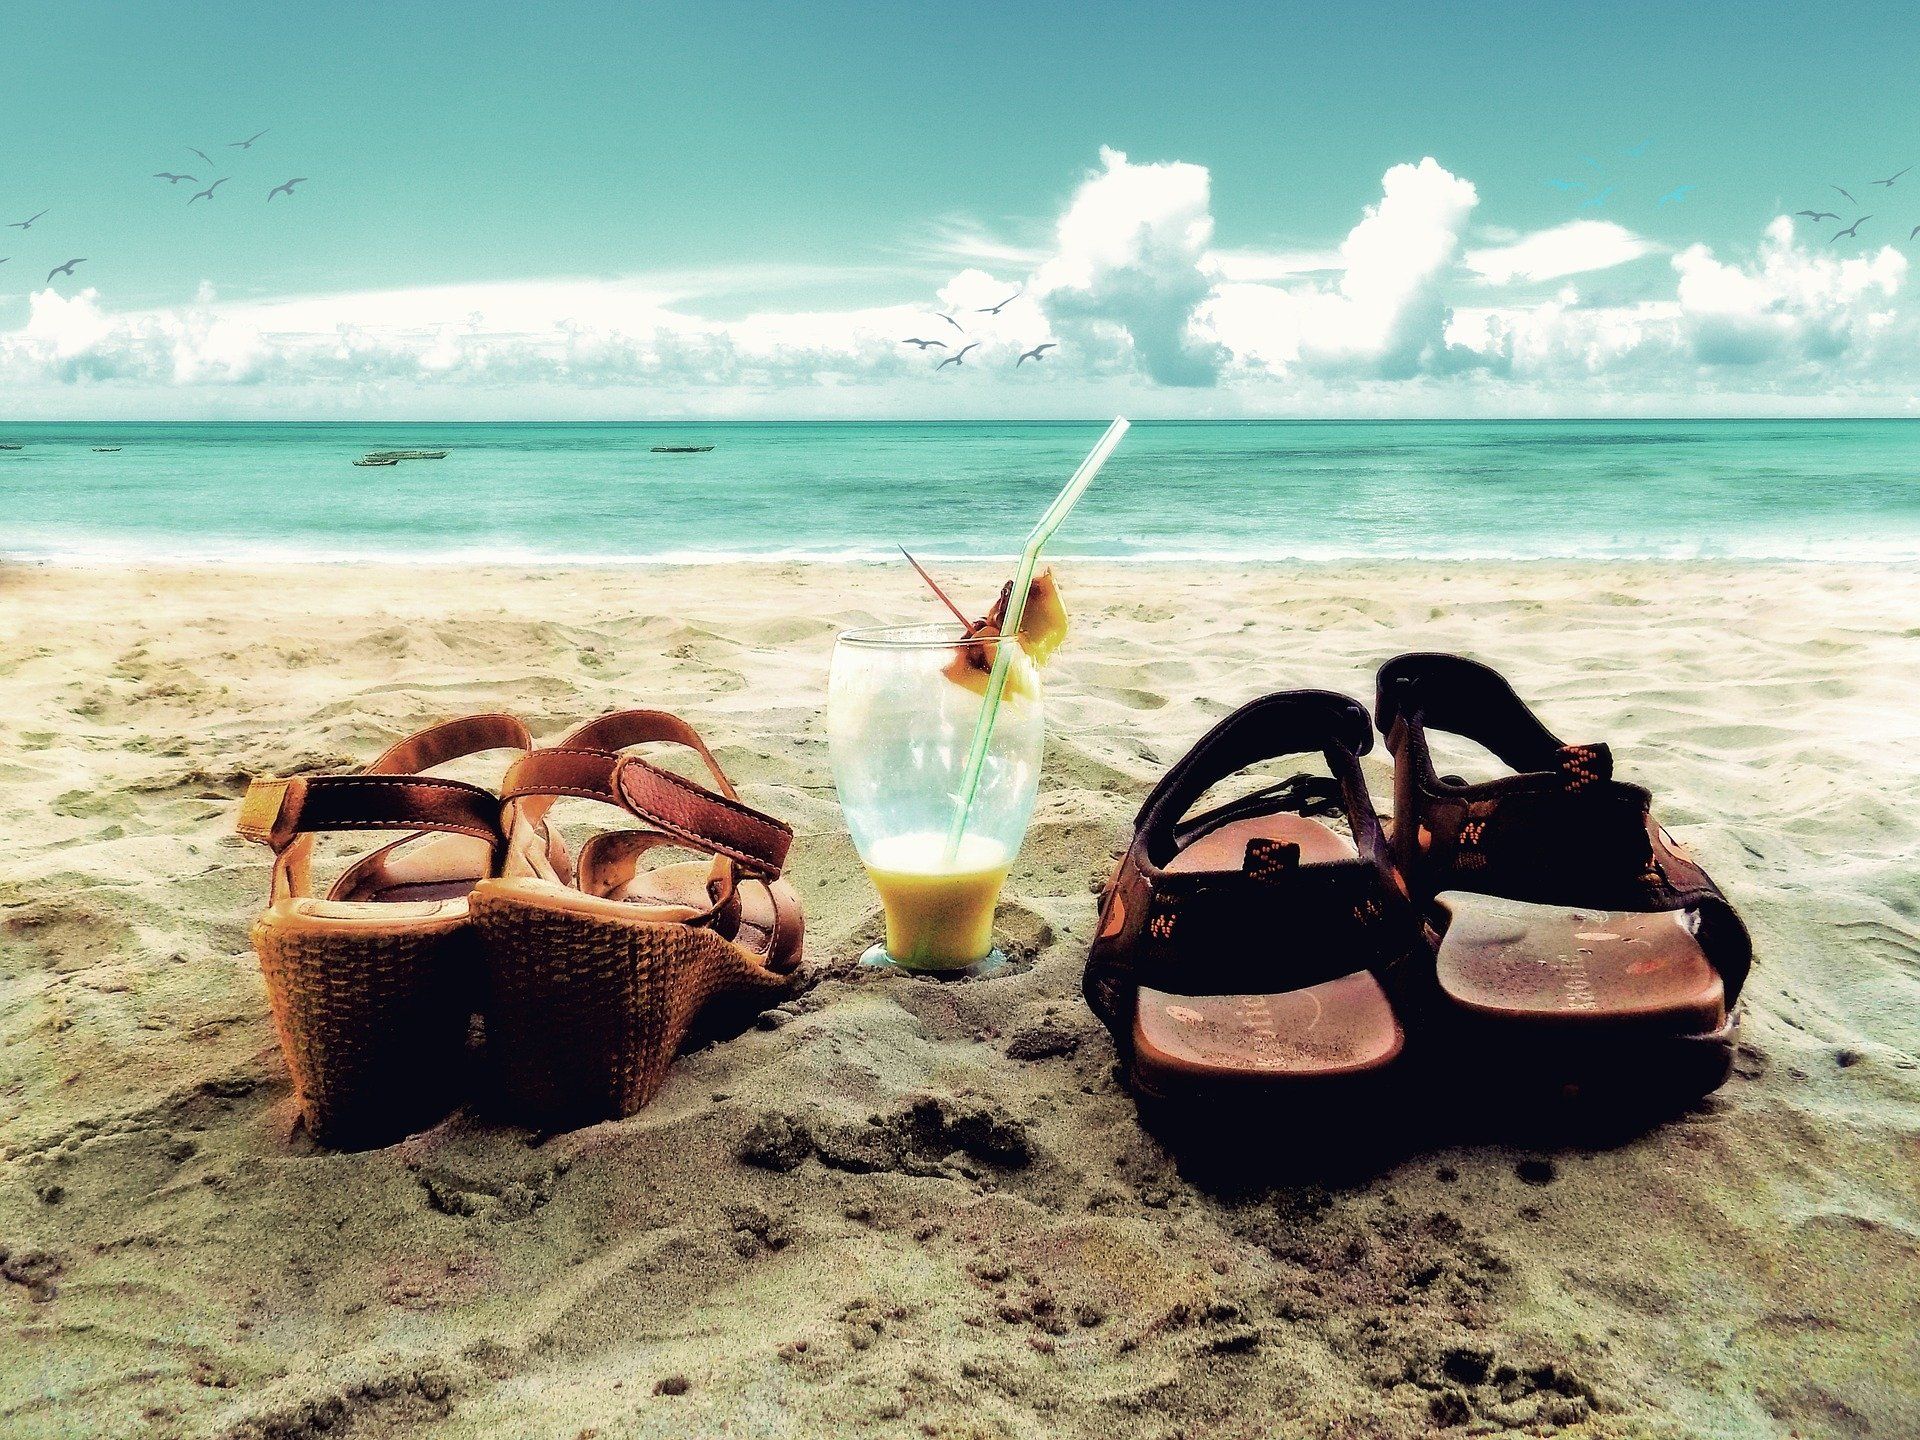 His and hers sandals on a tropical beach HD Wallpaper. Background